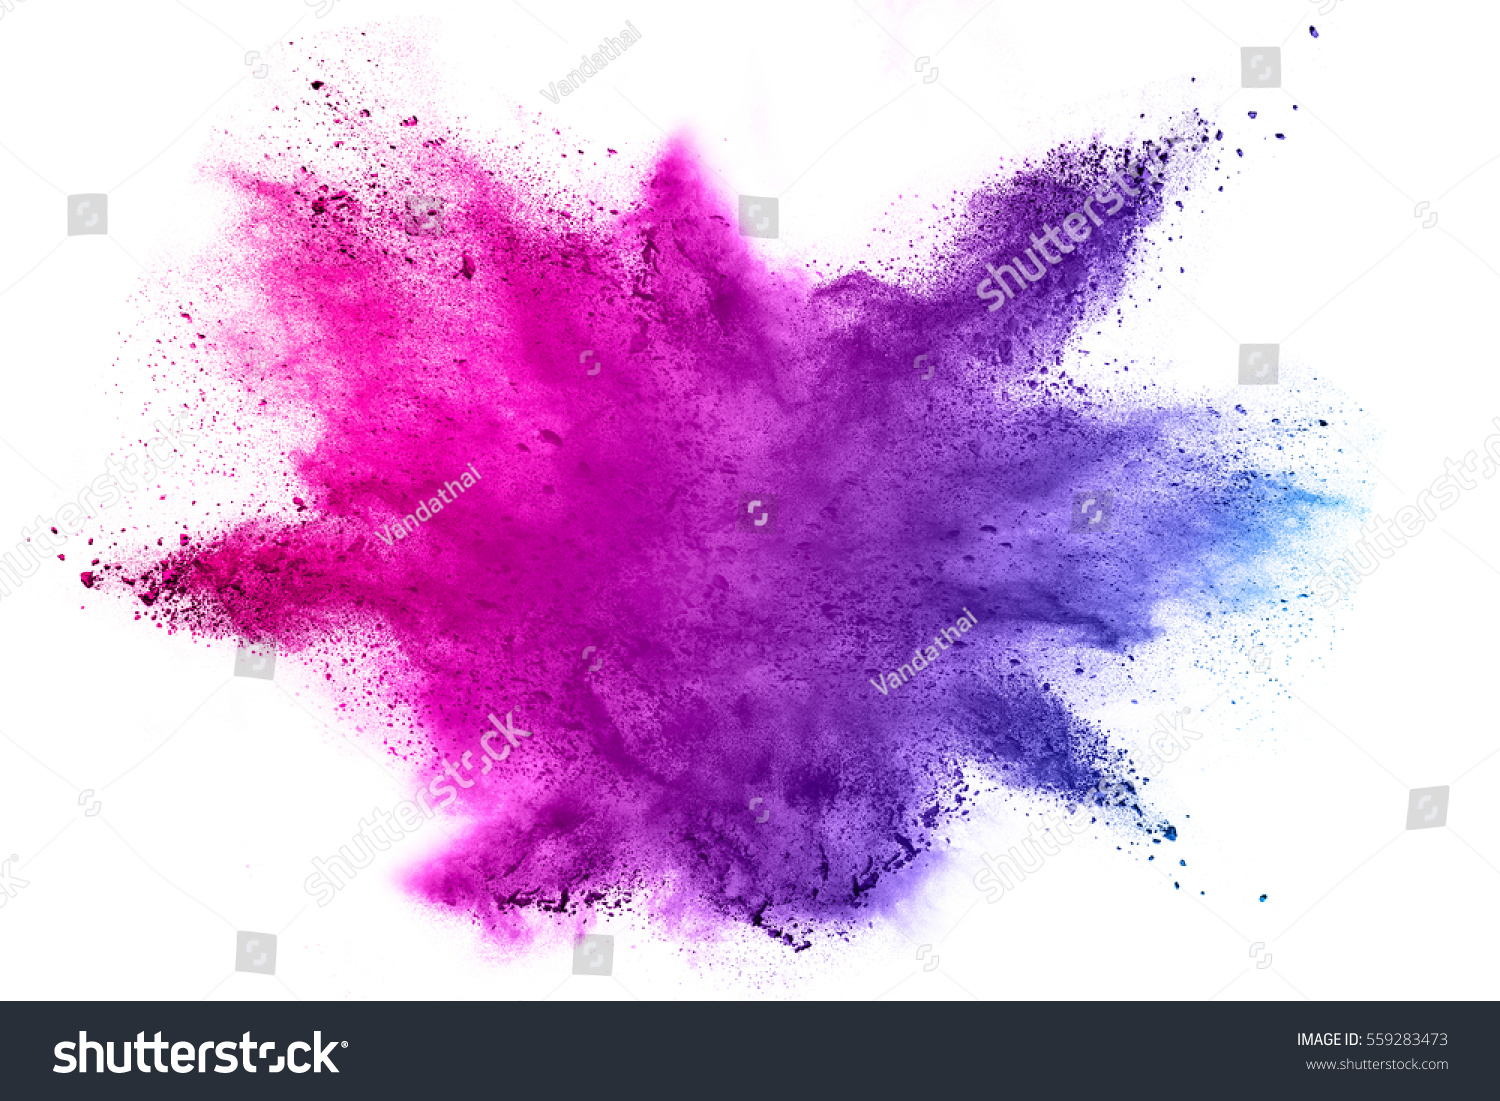 Explosion of colored powder on white background #559283473